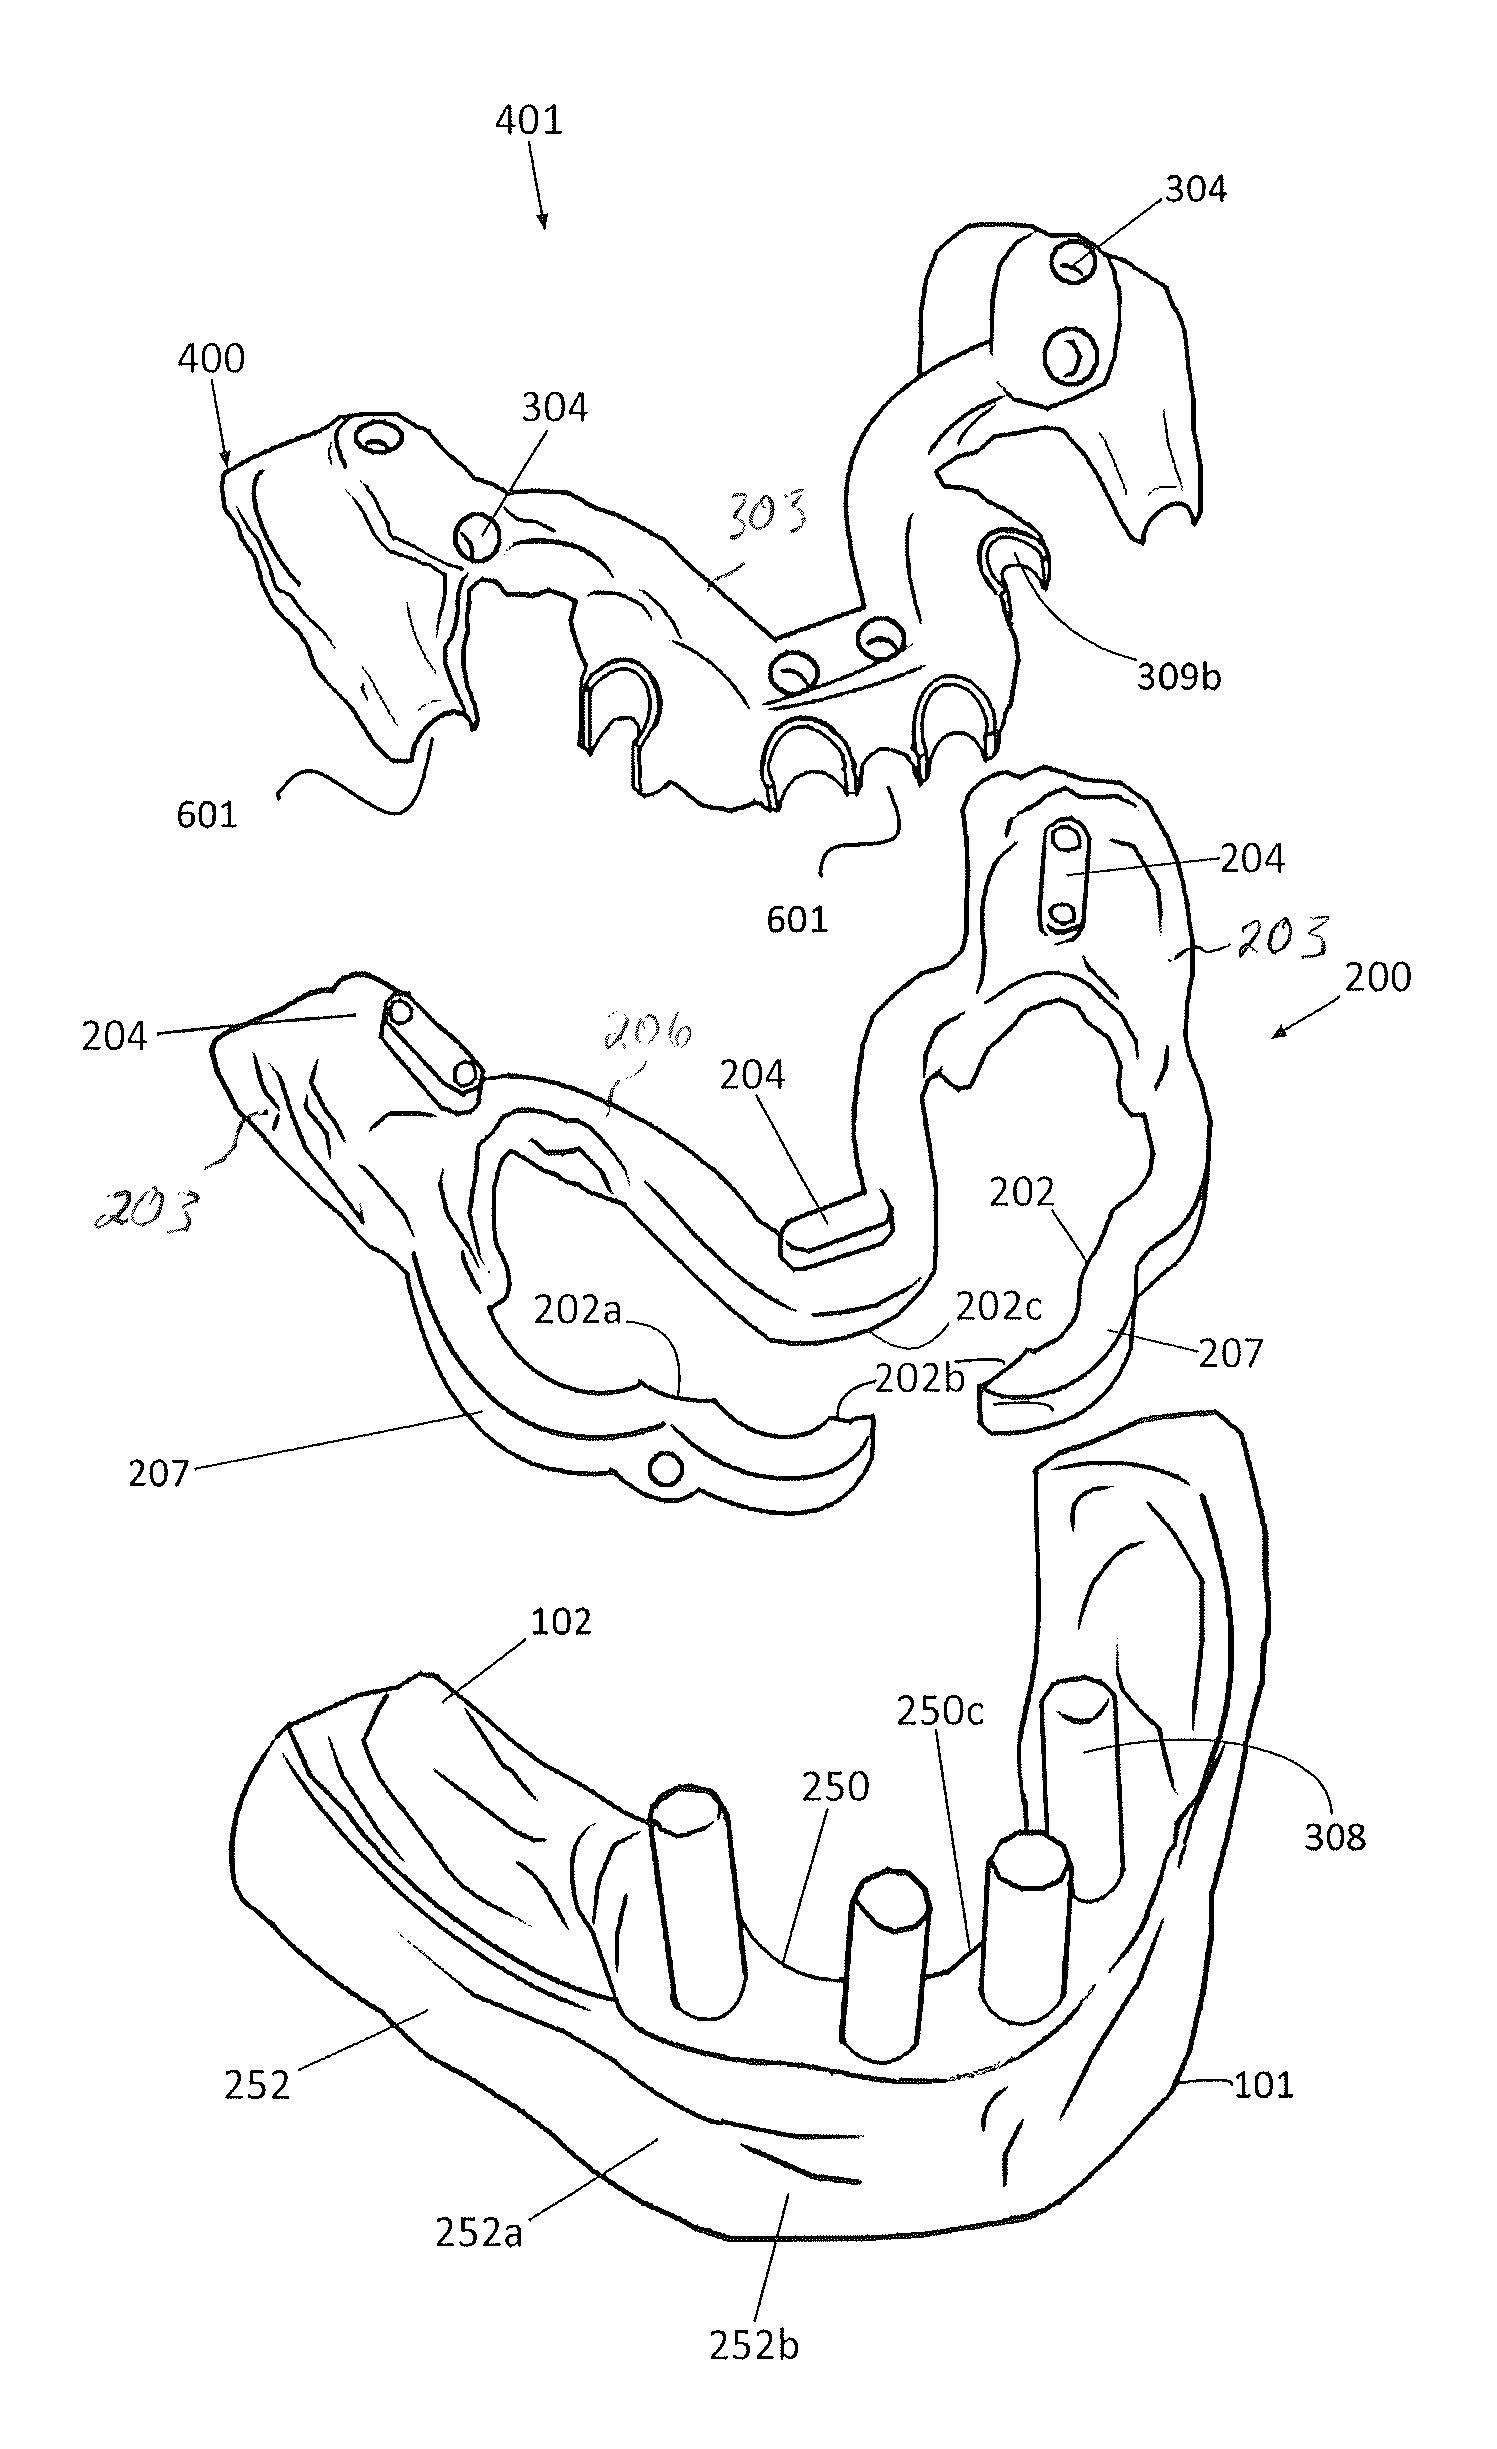 Edentulous surgical guide